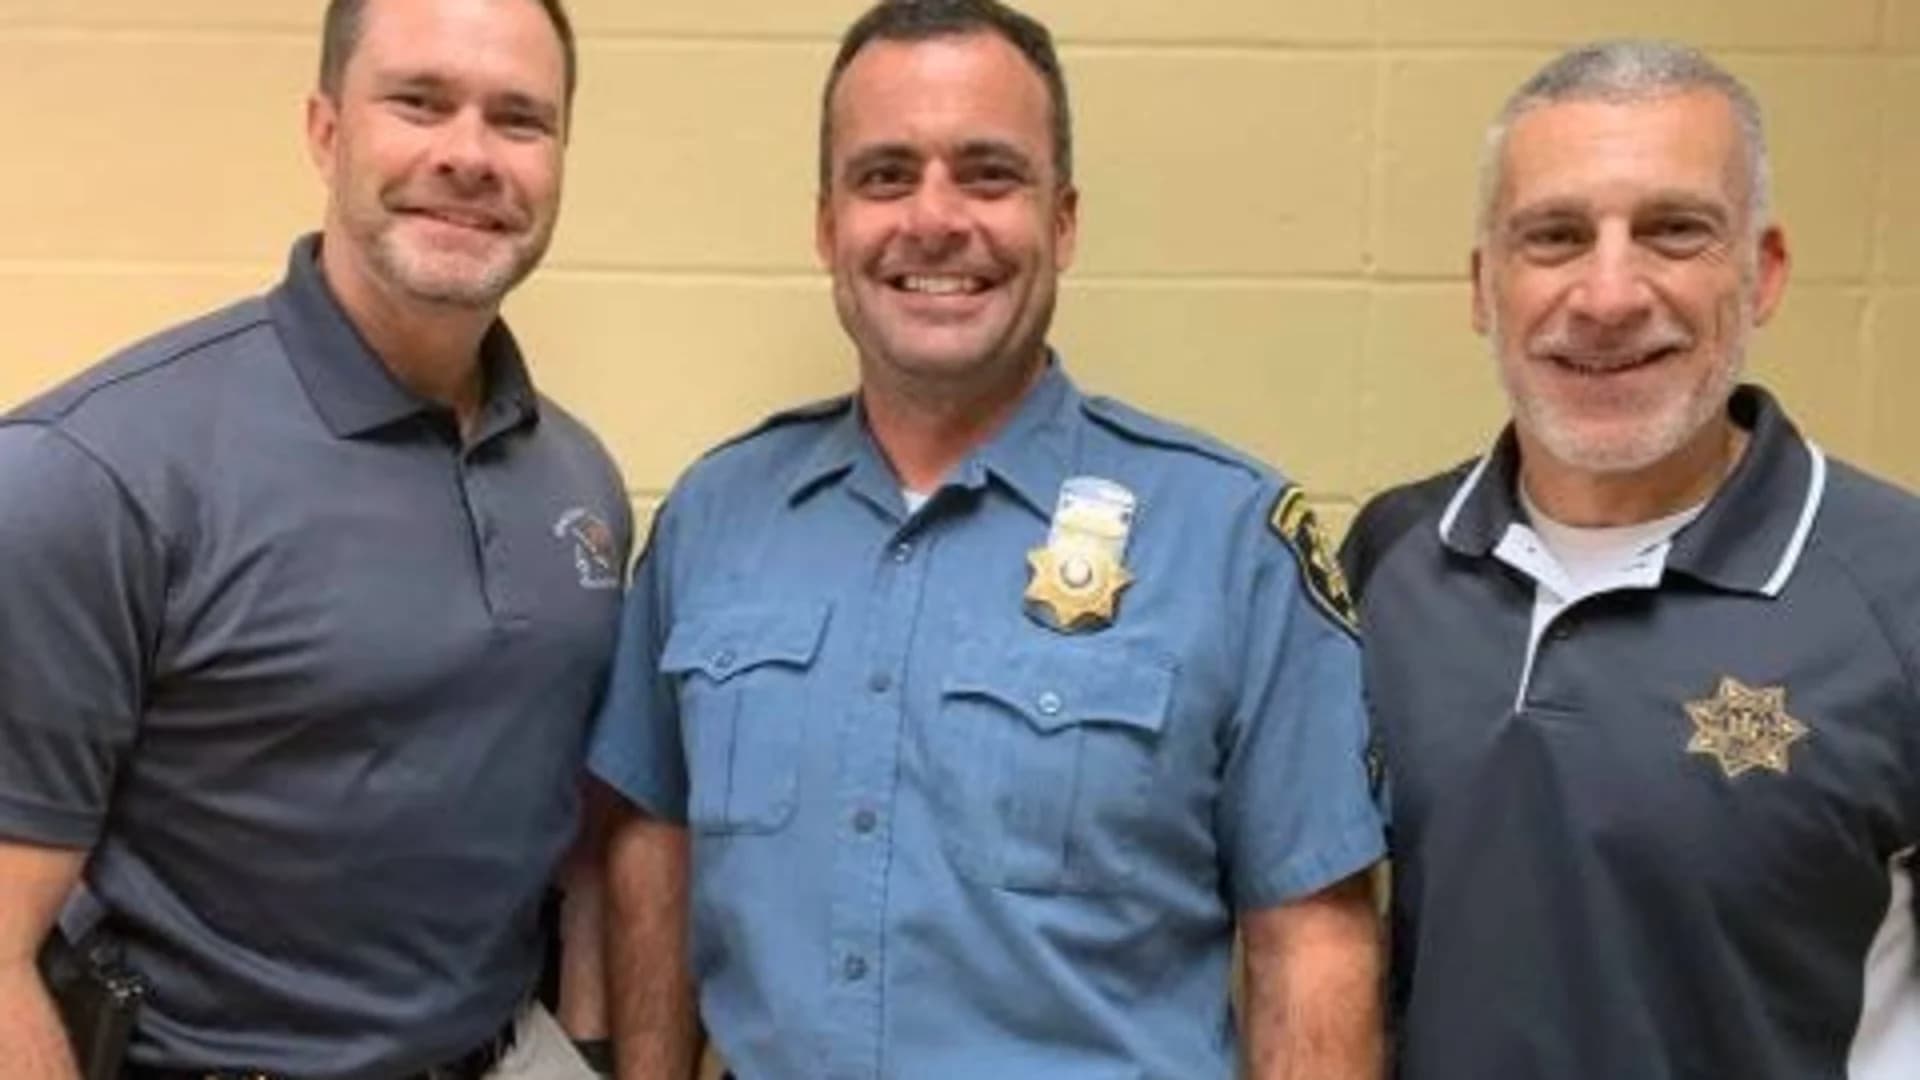 Suffolk Sheriff’s office joins fight against cancer during ‘No-Shave November’